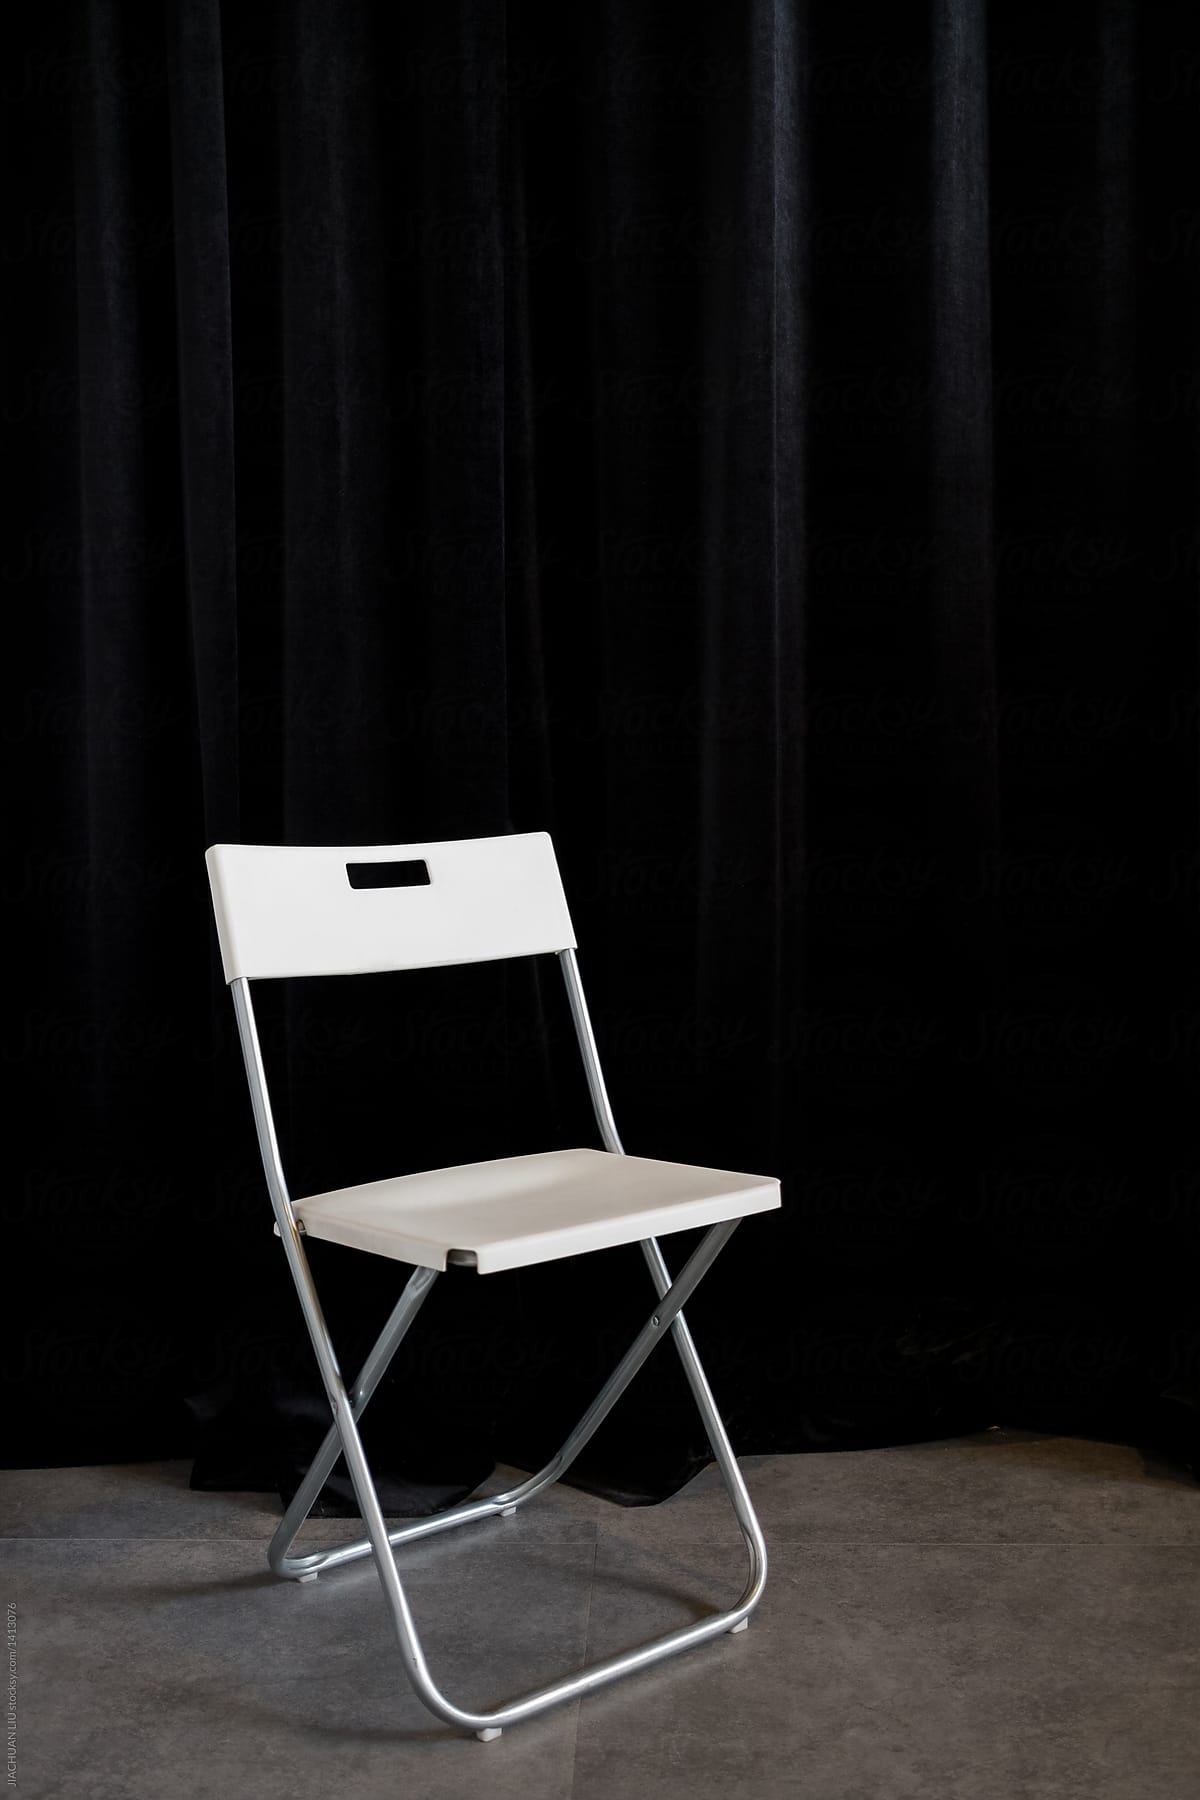 Empty chair on stage